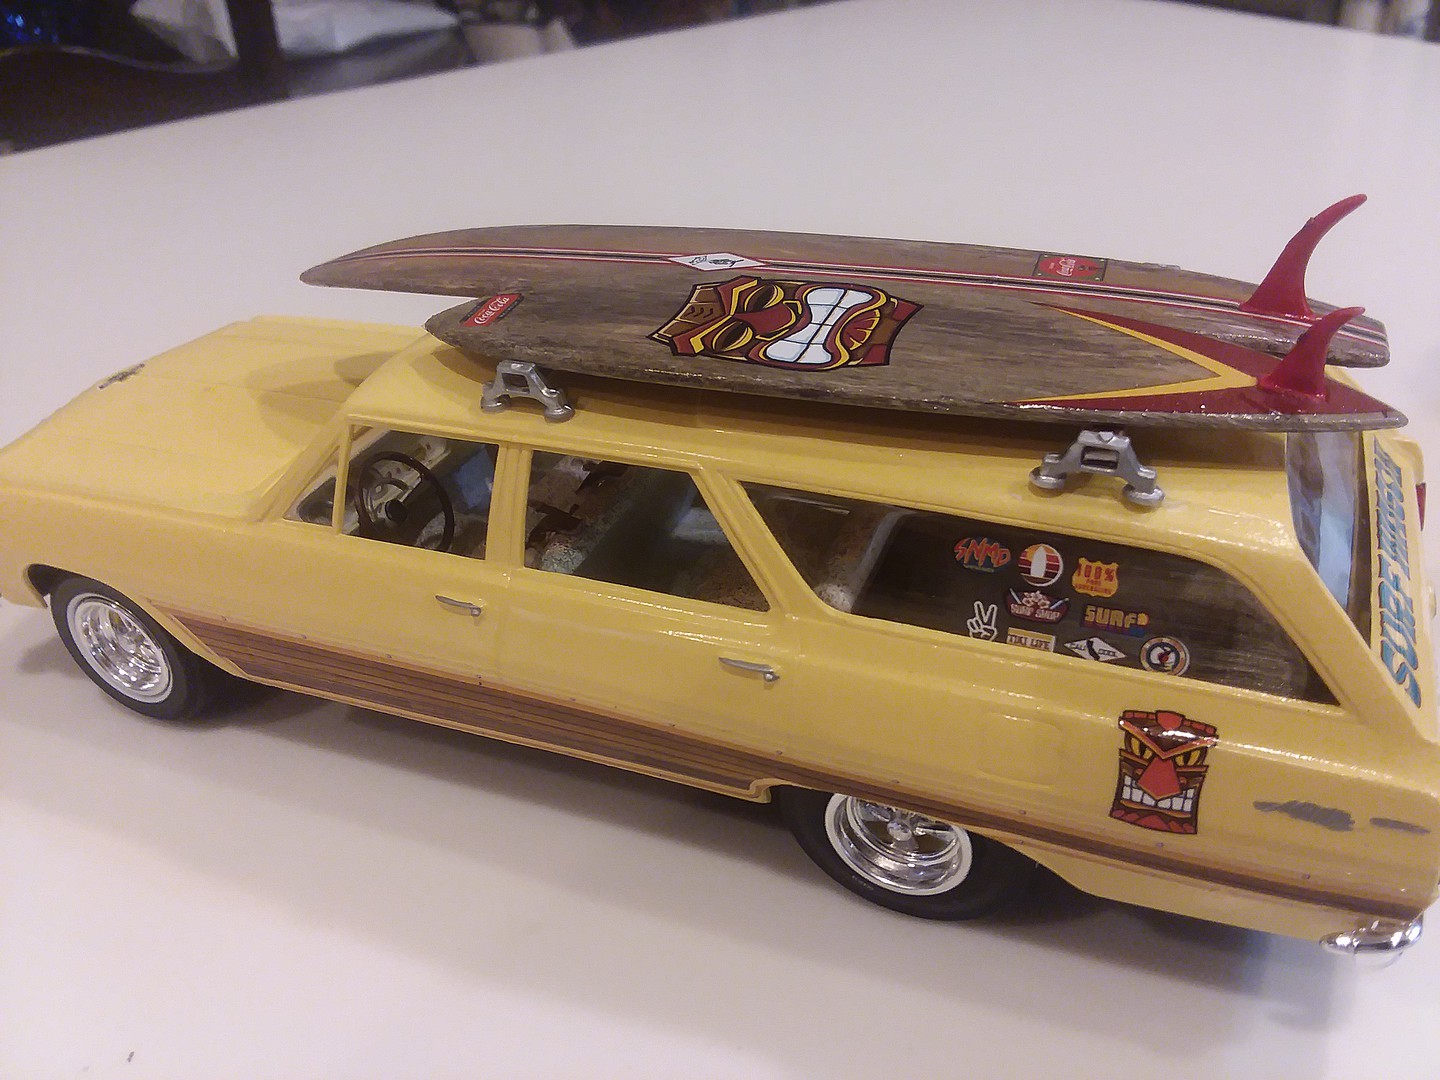 AMT1131 for sale online AMT 1965 Chevy Chevelle Surf Wagon 1:25 Model Kit 